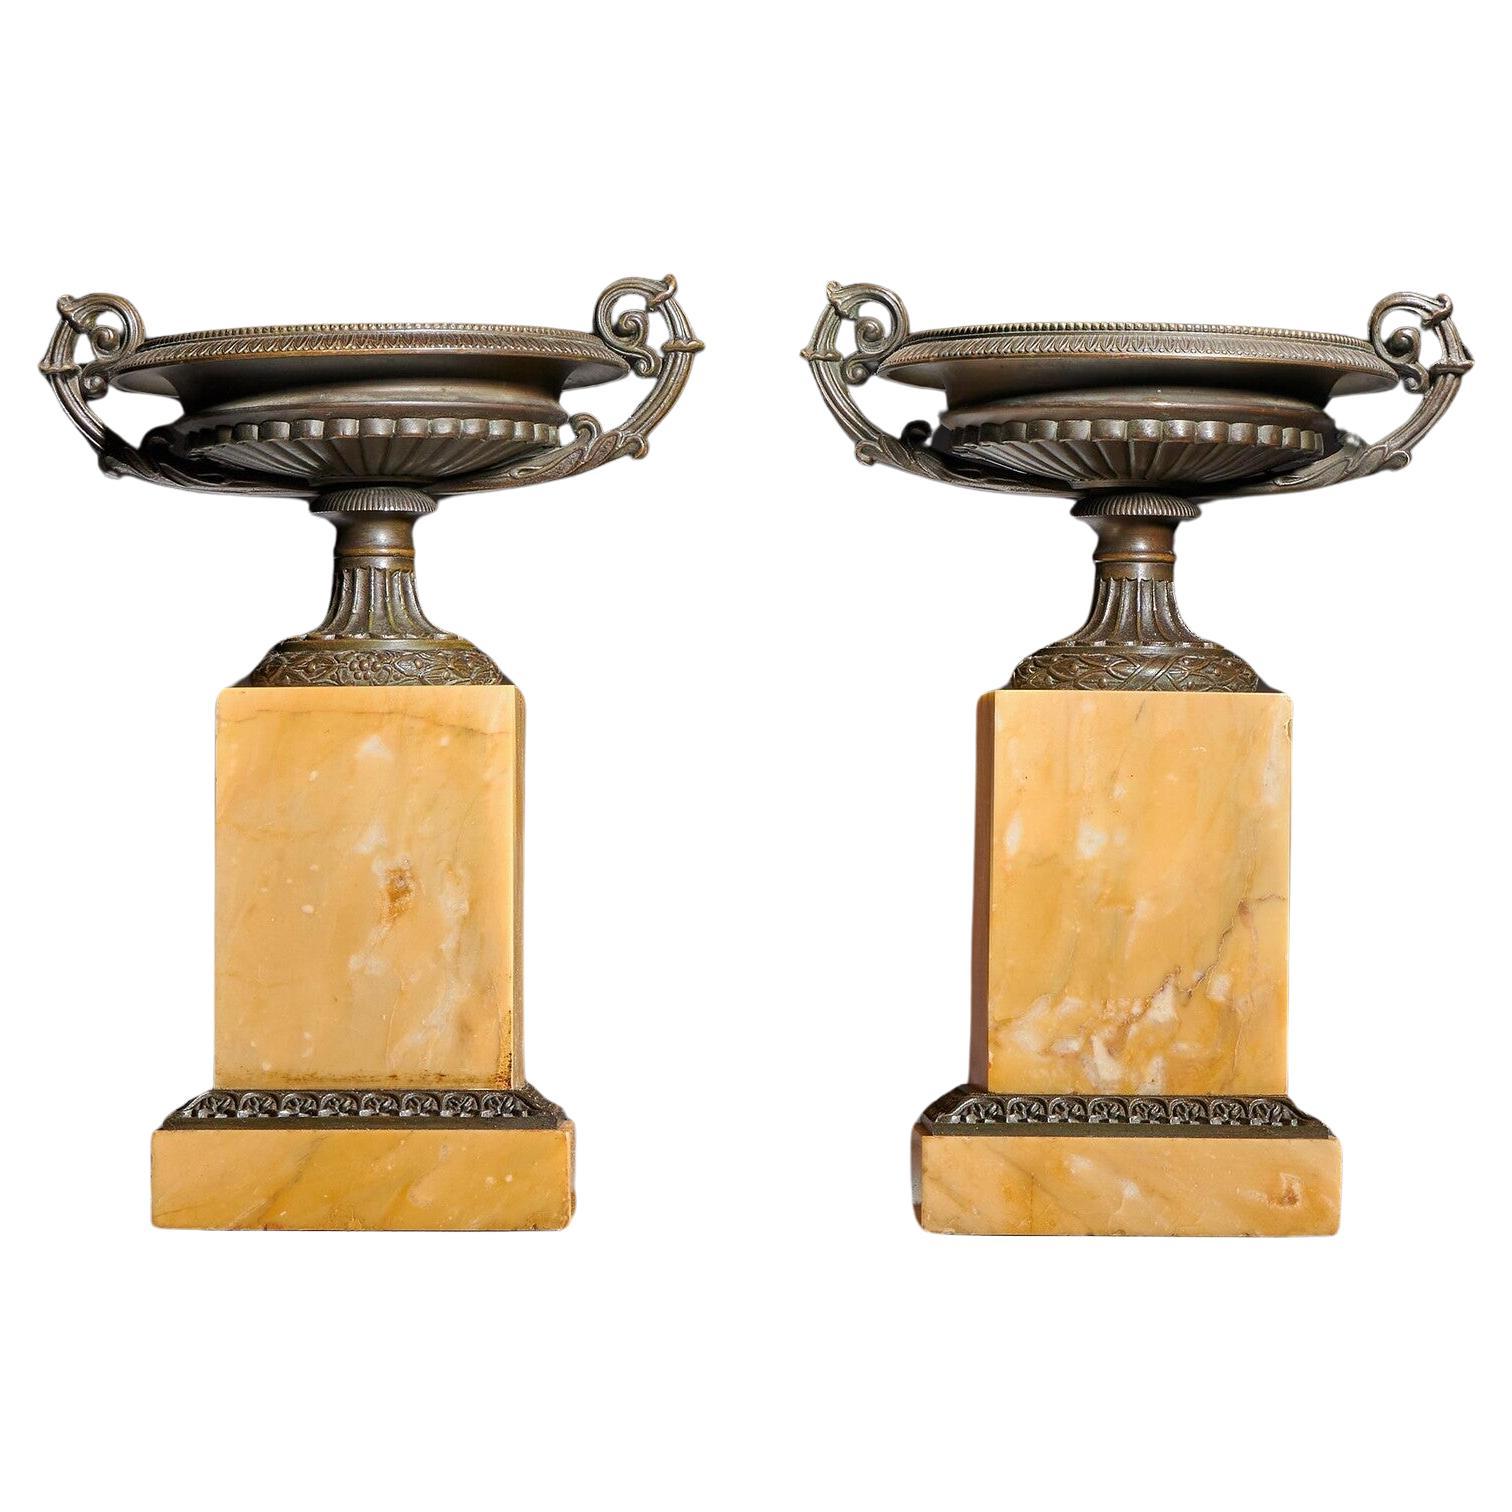 A Fine Pair of Early 19th Century French Grand Tour Bronze & Siena Marble Tazzas